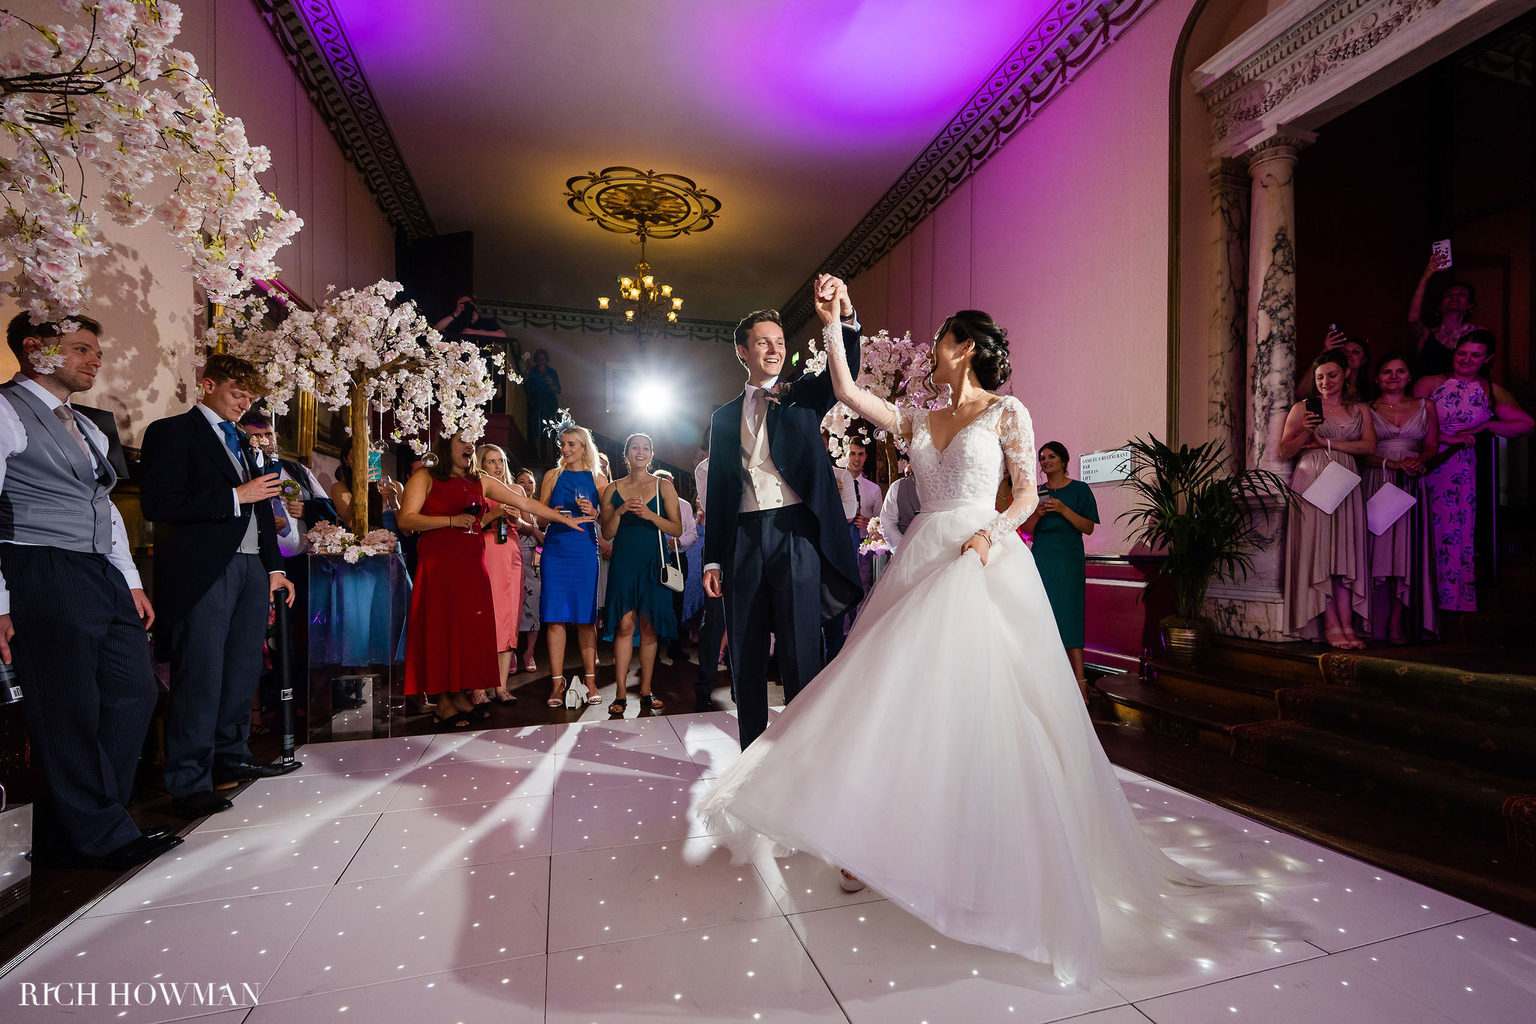 Bridge and groom's first dance during a wedding reception at Swinton Estate in North Yorkshire. Photo by Rich Howman.